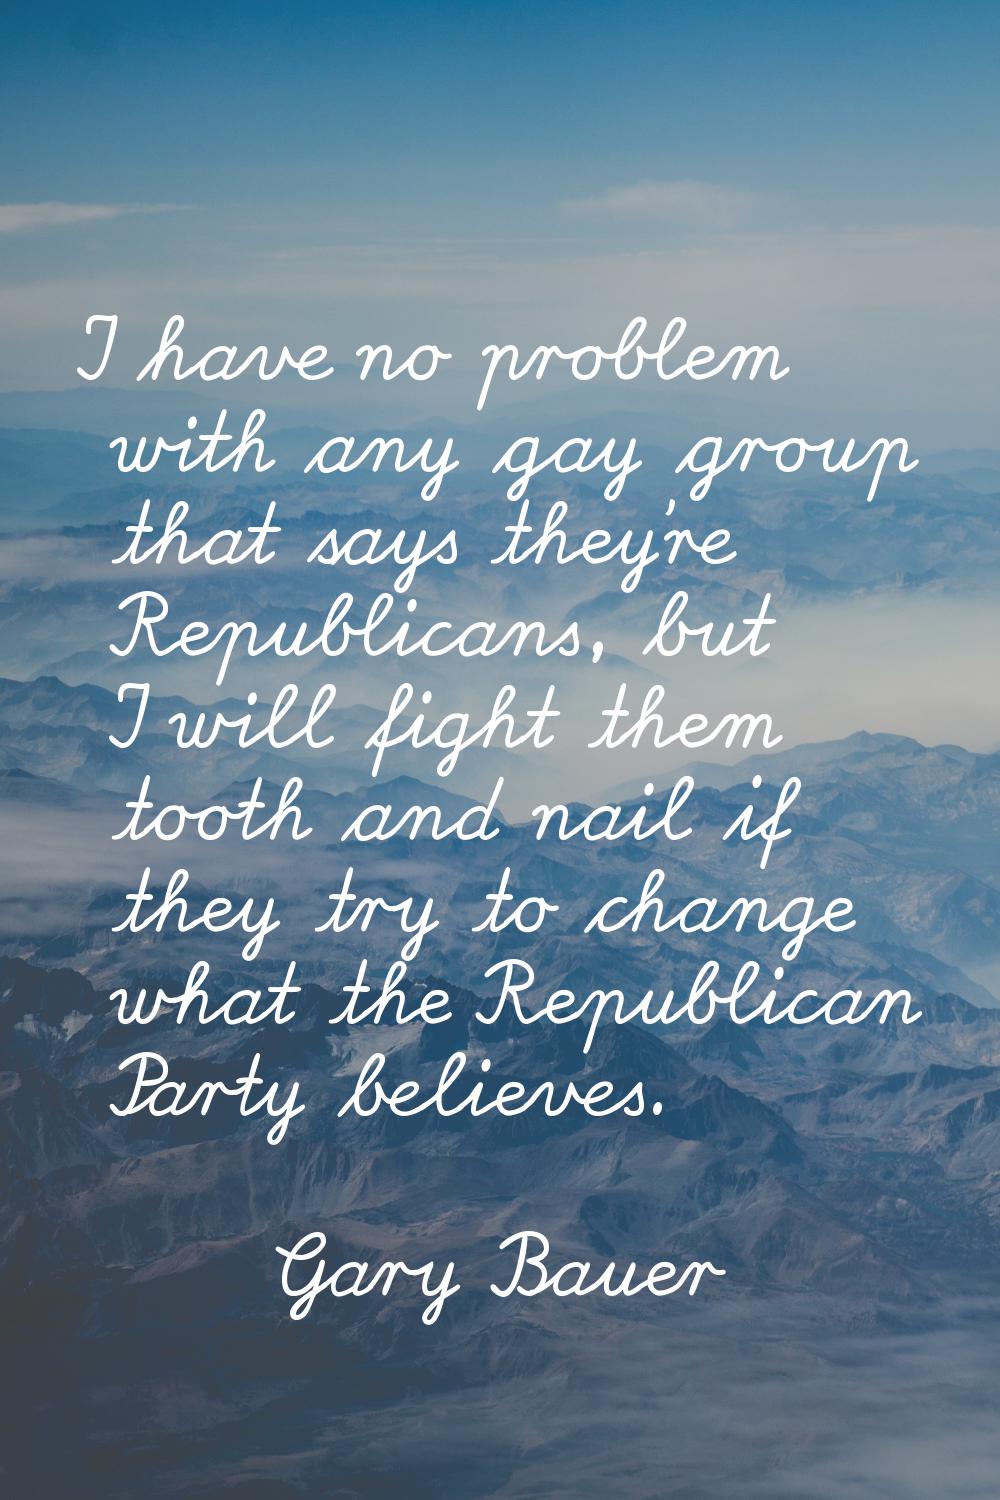 I have no problem with any gay group that says they're Republicans, but I will fight them tooth and